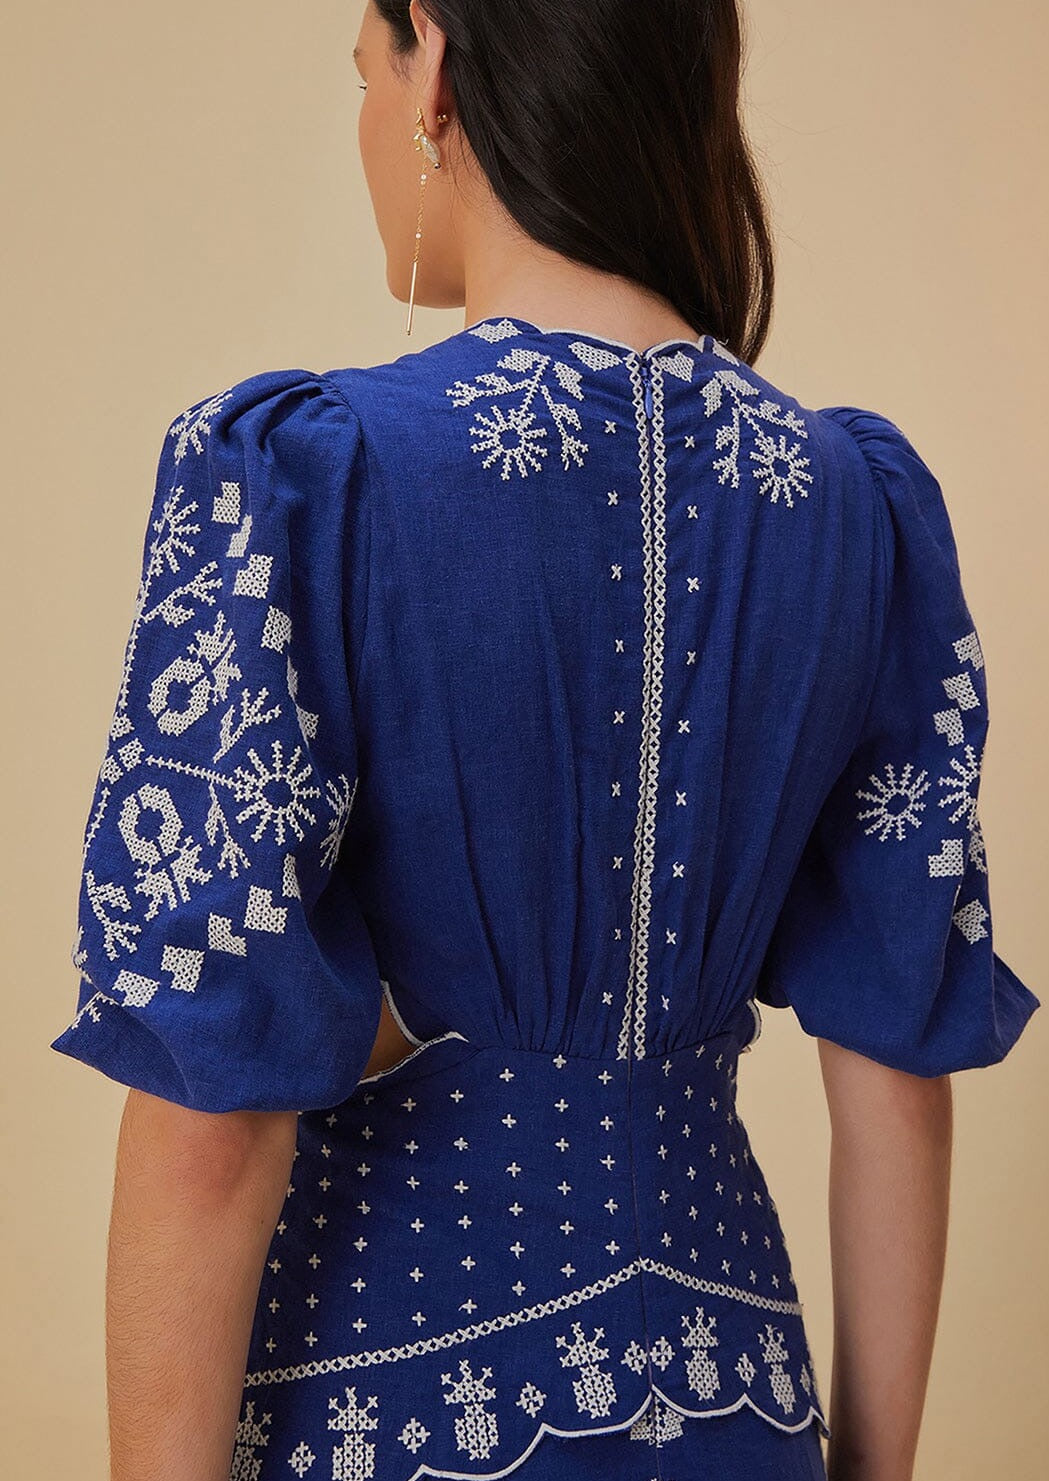 Blue Embroidered Short Sleeve Cut Out Midi Dress